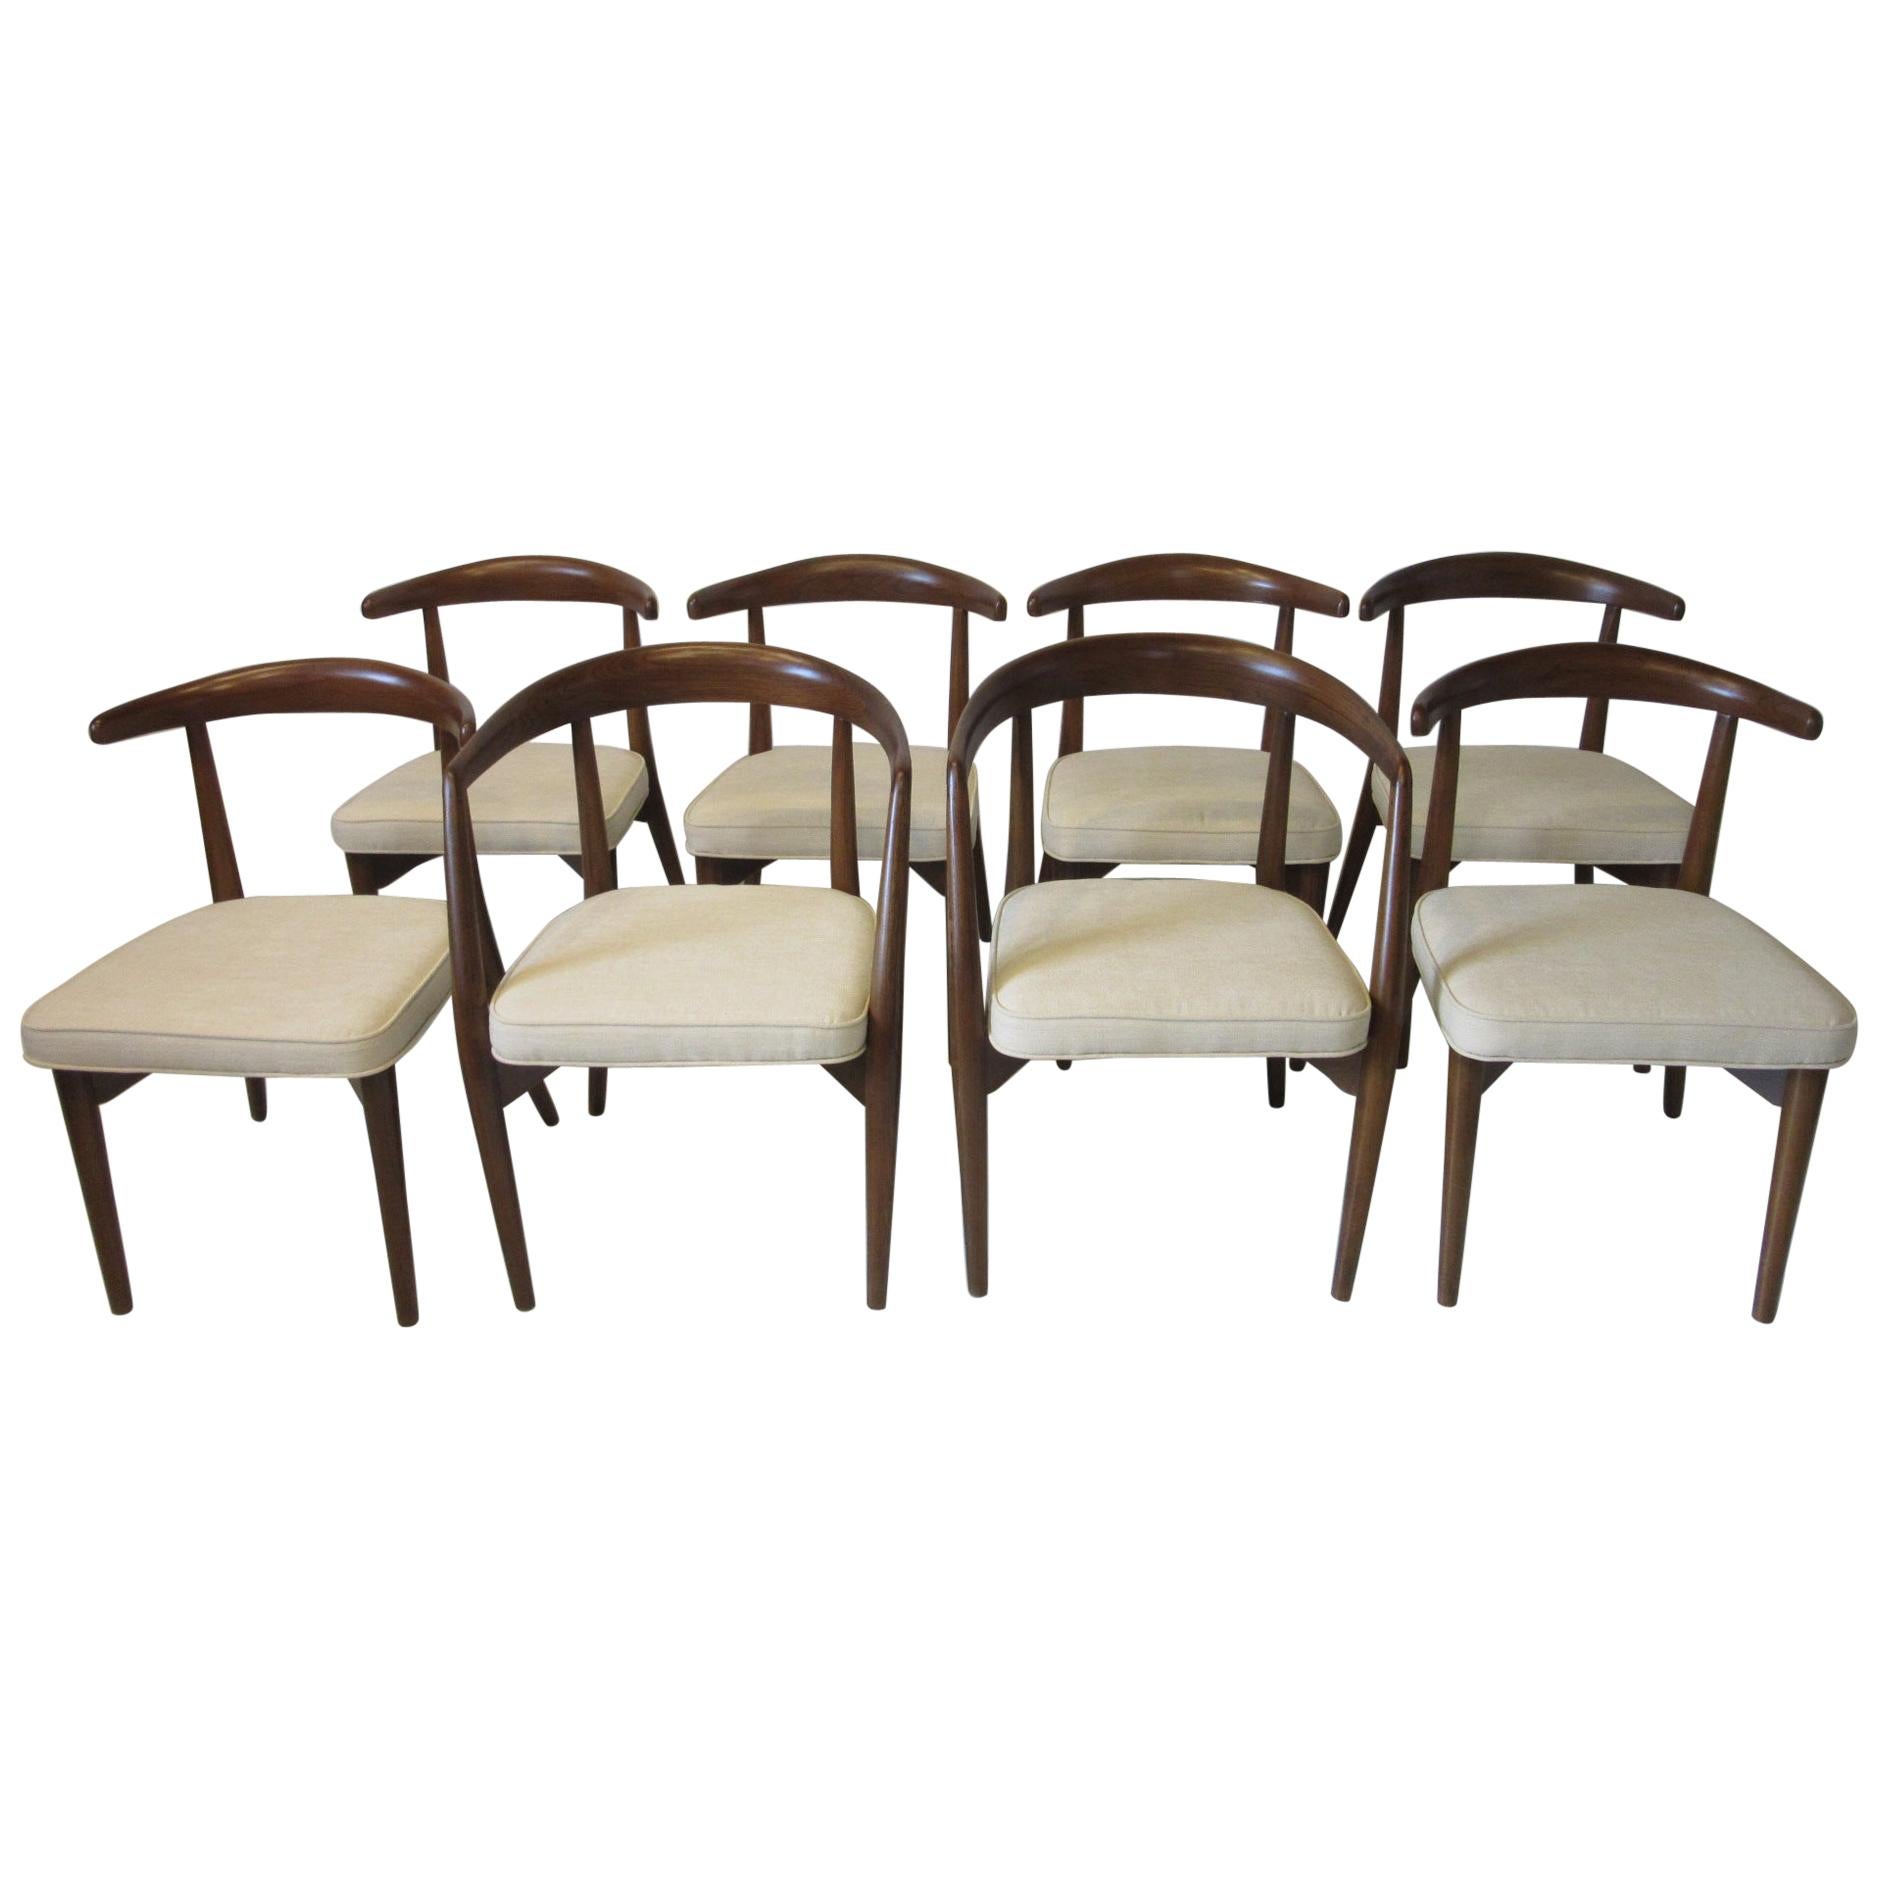 8 Lawrence Peabody Walnut Dining Chairs for Craft Associates